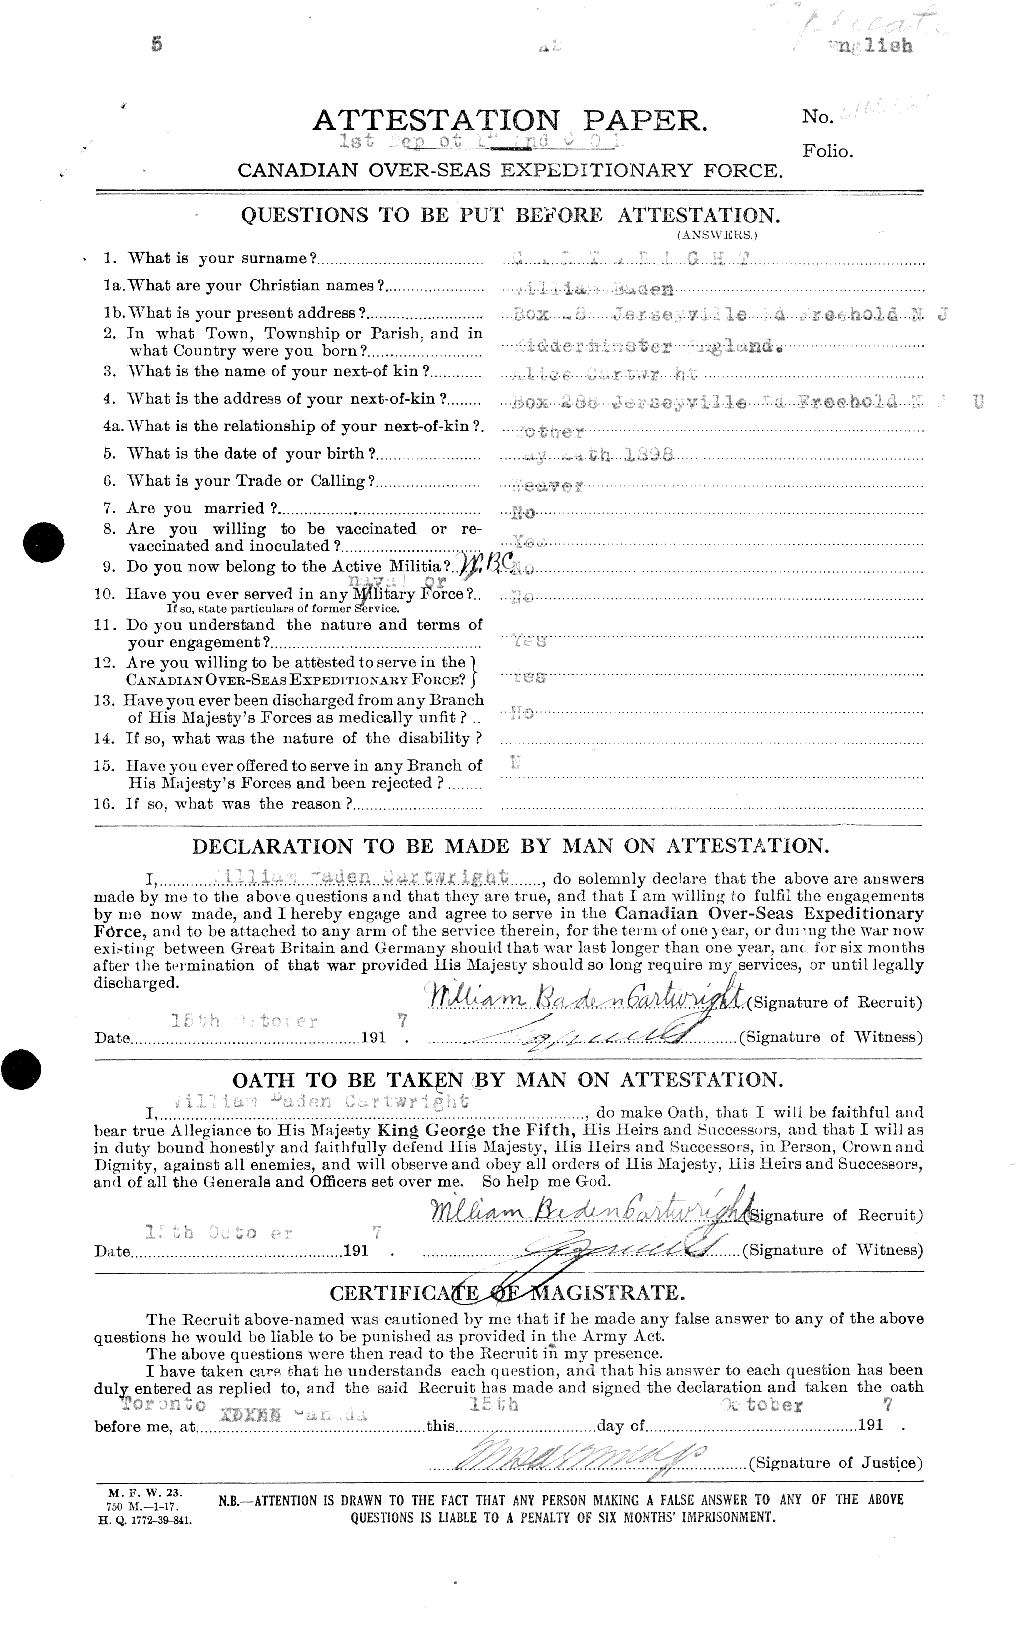 Personnel Records of the First World War - CEF 012549a